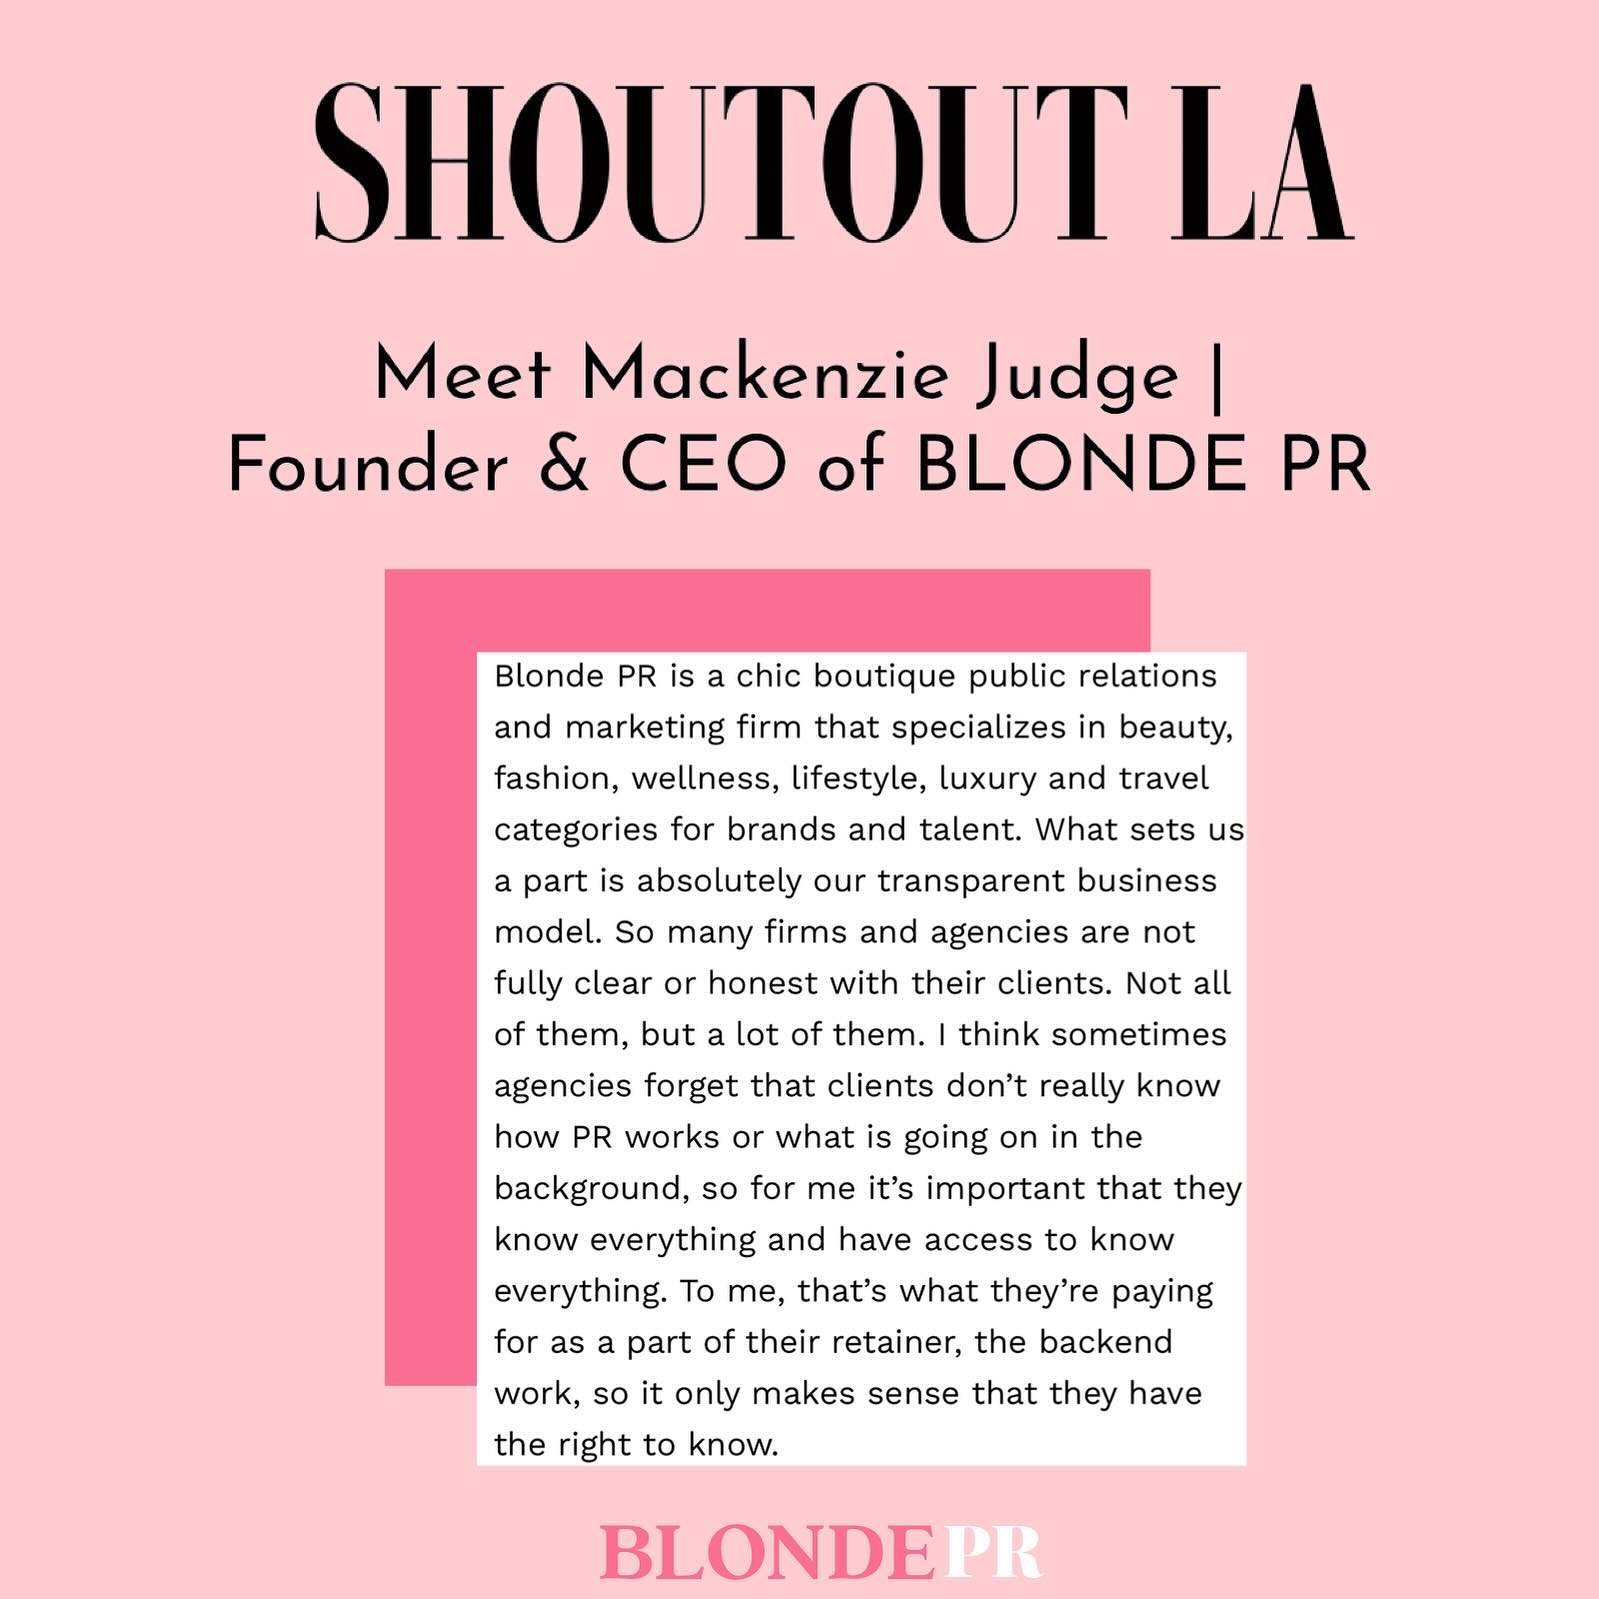 Starting Blonde PR has been no easy task, but our founder @mackenzieejudgee shares some of her tips &amp; backstory on our first year in review in the latest @shoutoutlaofficial 💋

#blondepr